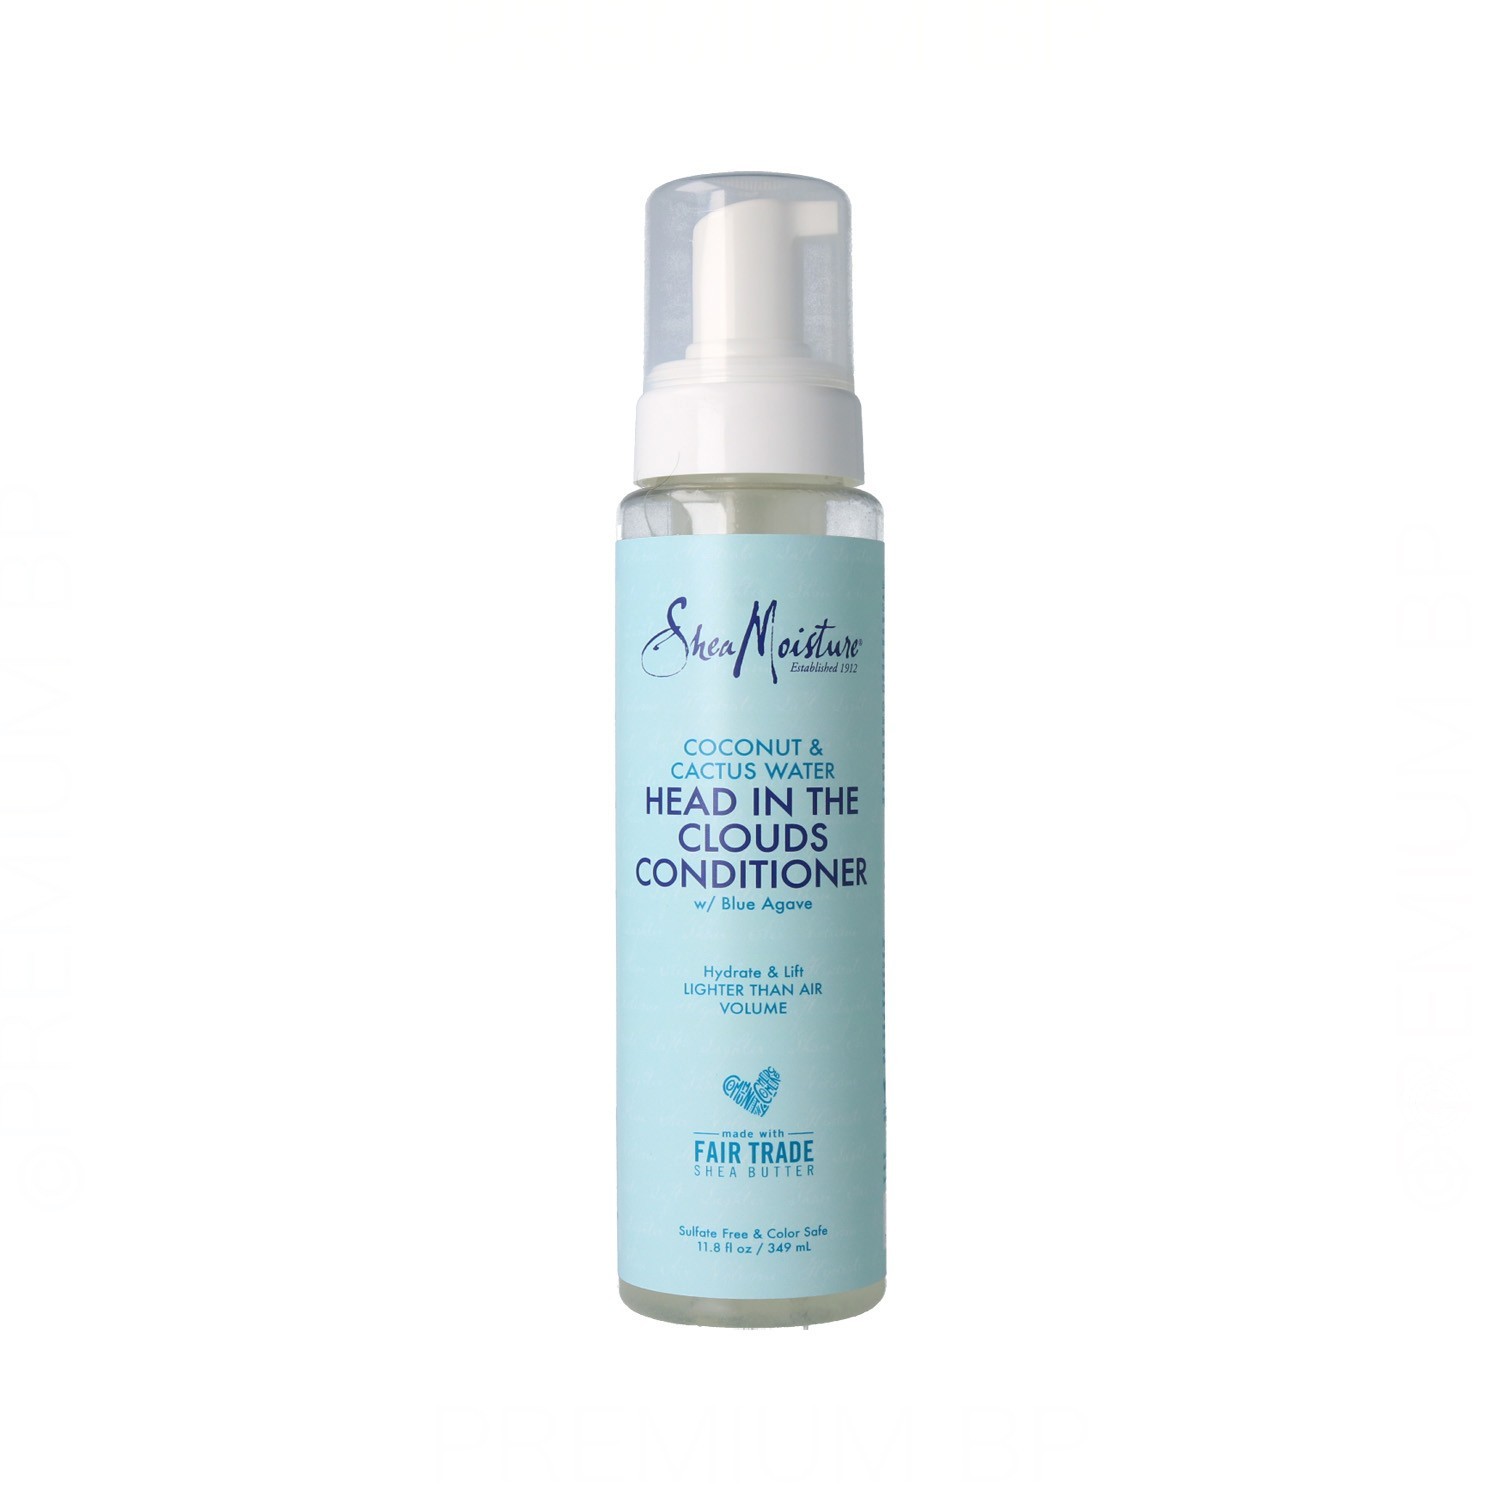 Shea Moisture Cactus & Coconut Water Head In The Clouds Conditionneur 11.8OZ/349 ml